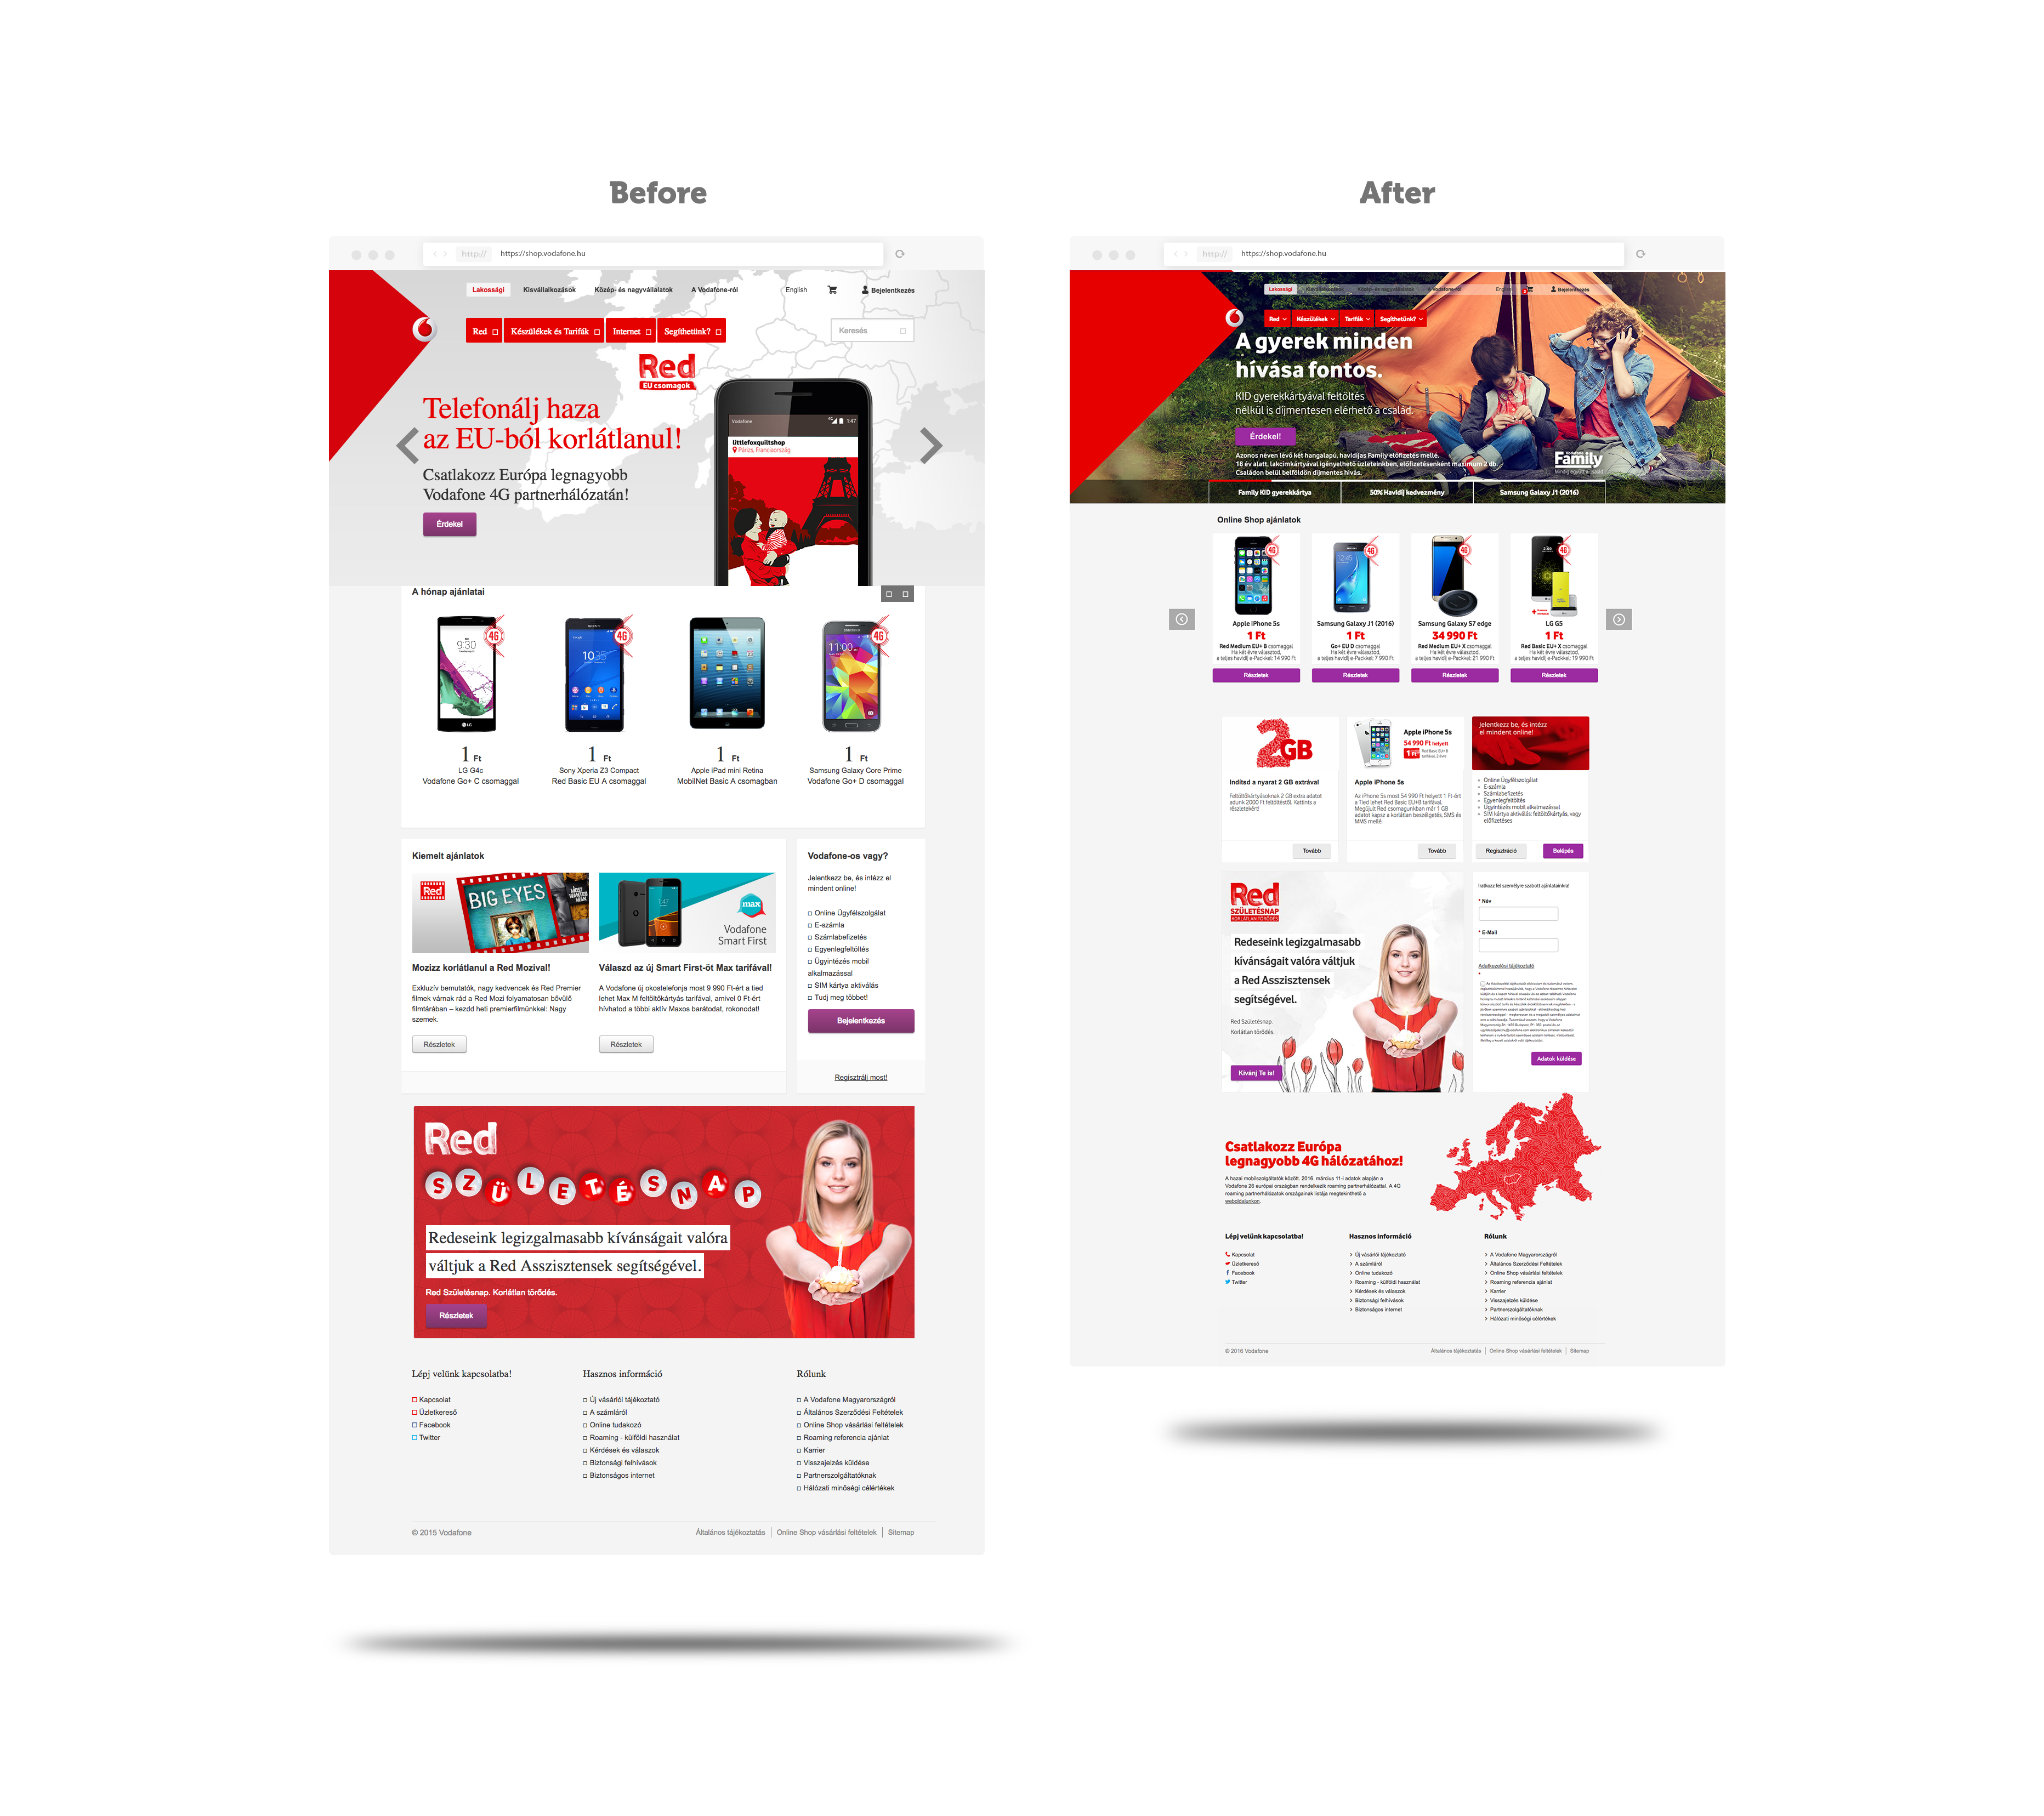 Vodafone homepage before and after